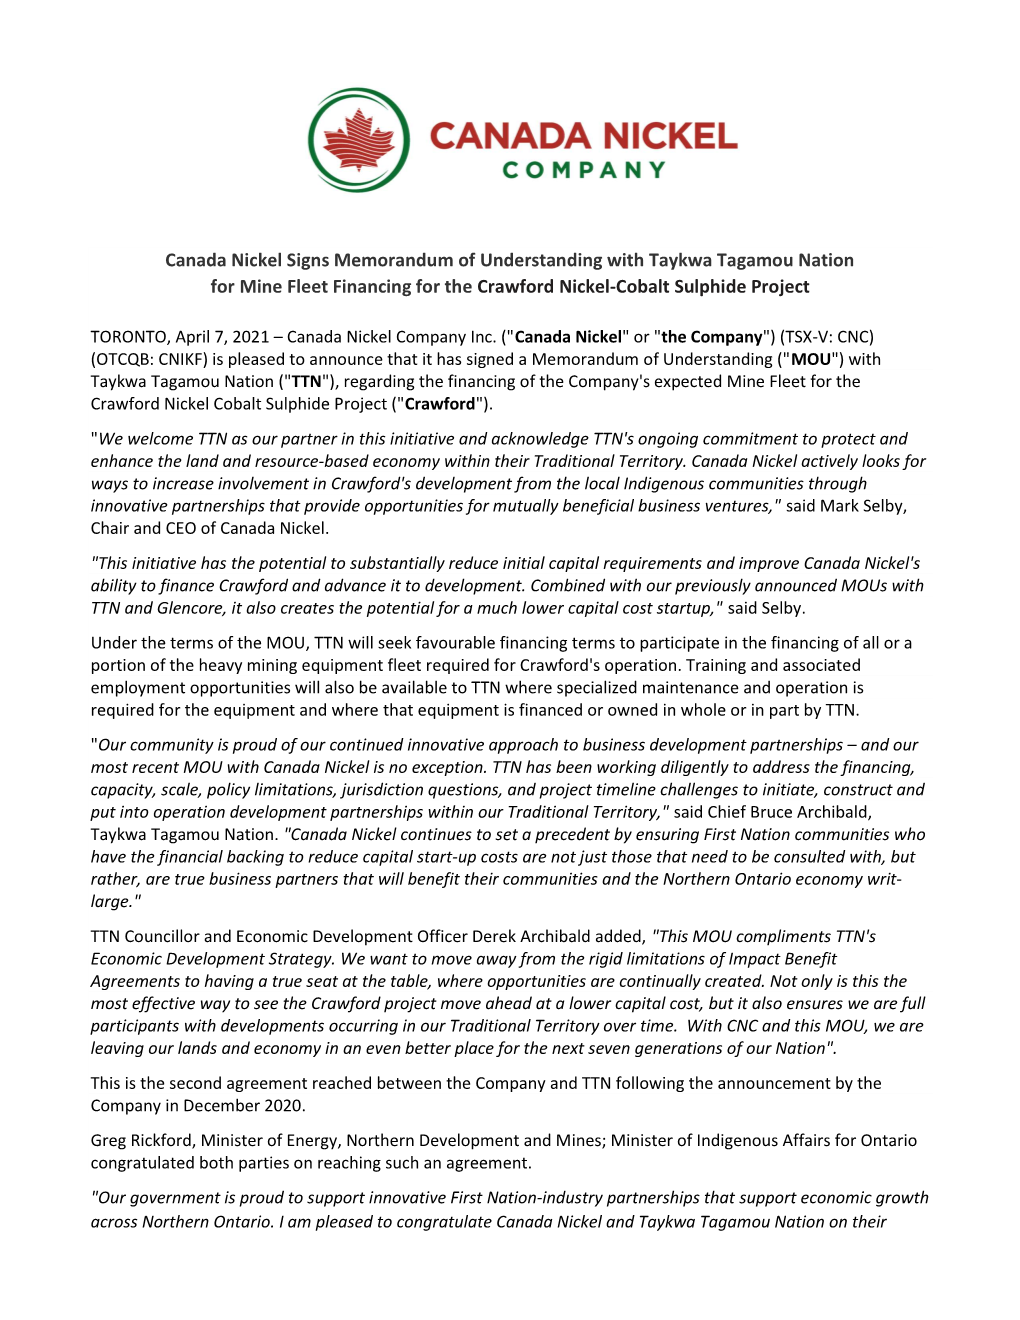 Canada Nickel Signs Memorandum of Understanding with Taykwa Tagamou Nation for Mine Fleet Financing for the Crawford Nickel-Cobalt Sulphide Project